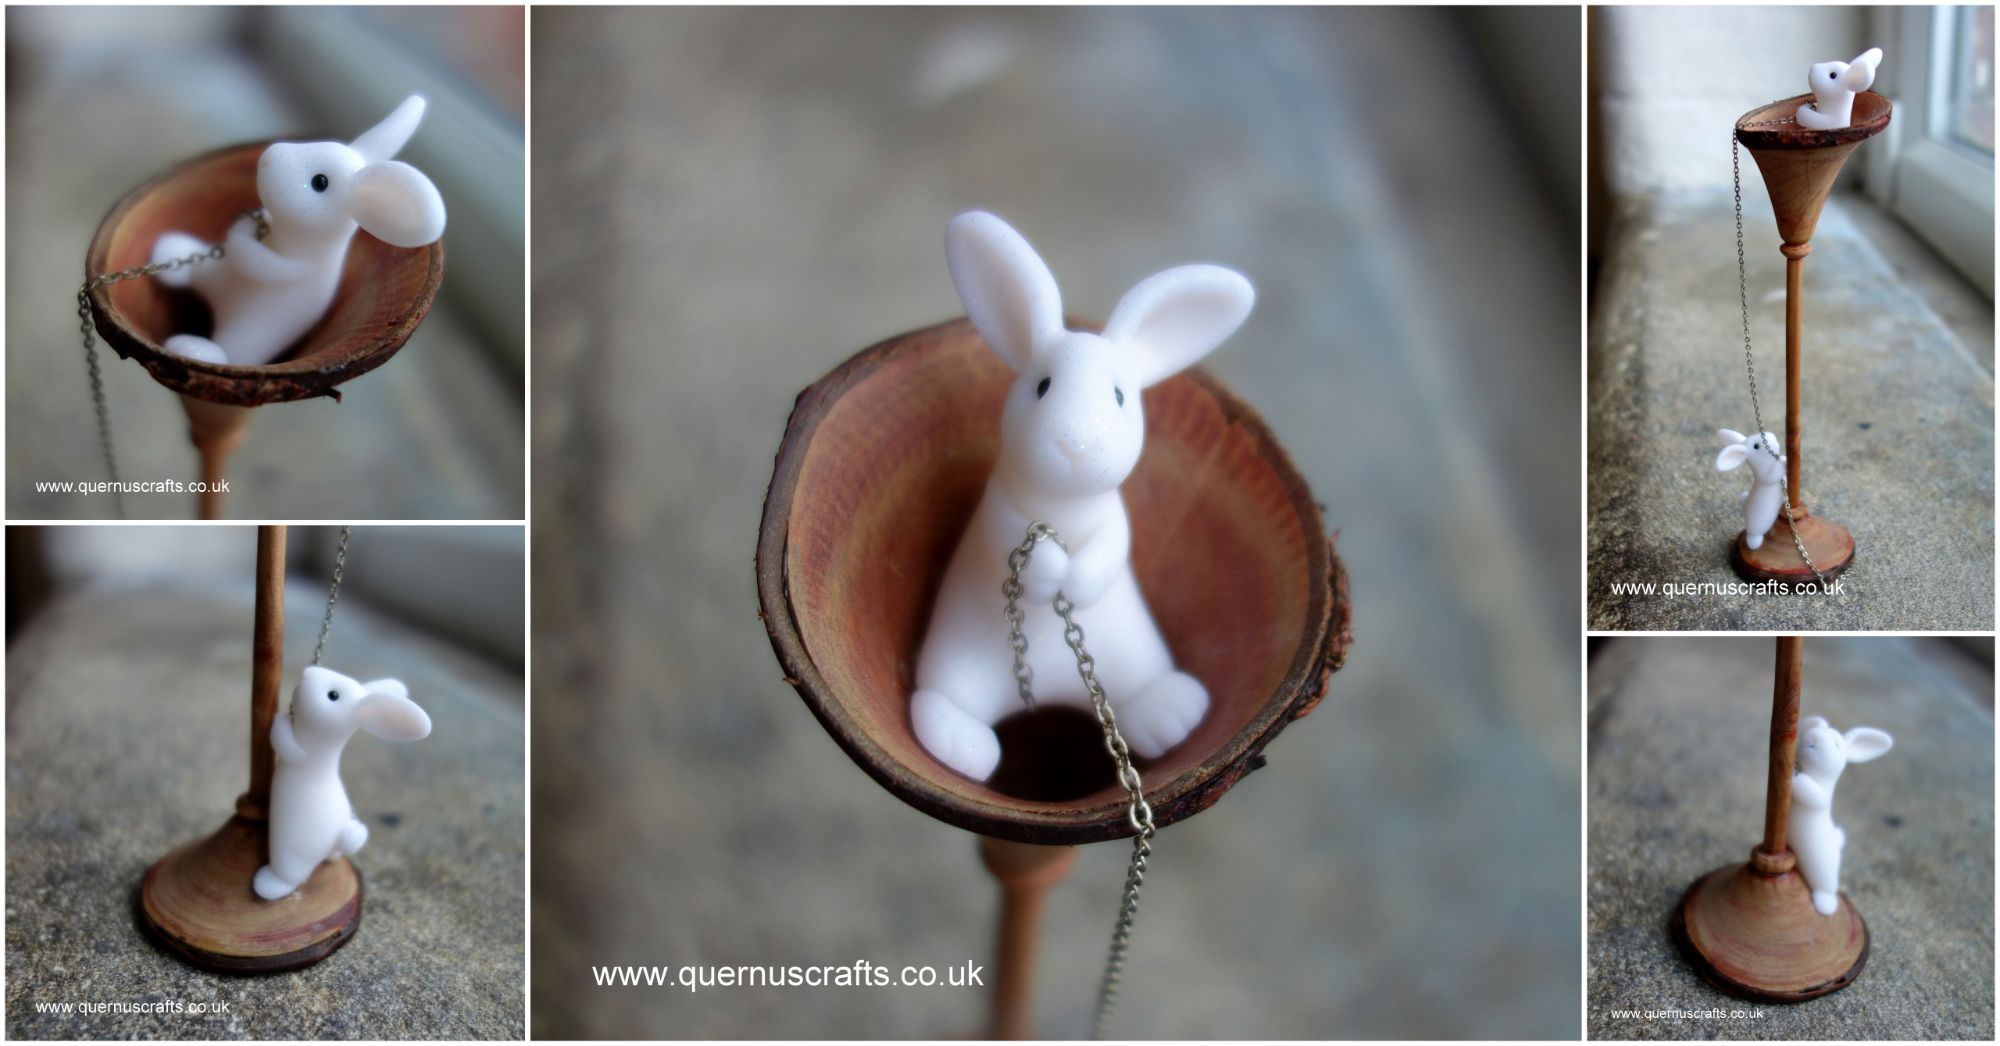 Auction for Two Wee Bunnies on a Wooden Goblet